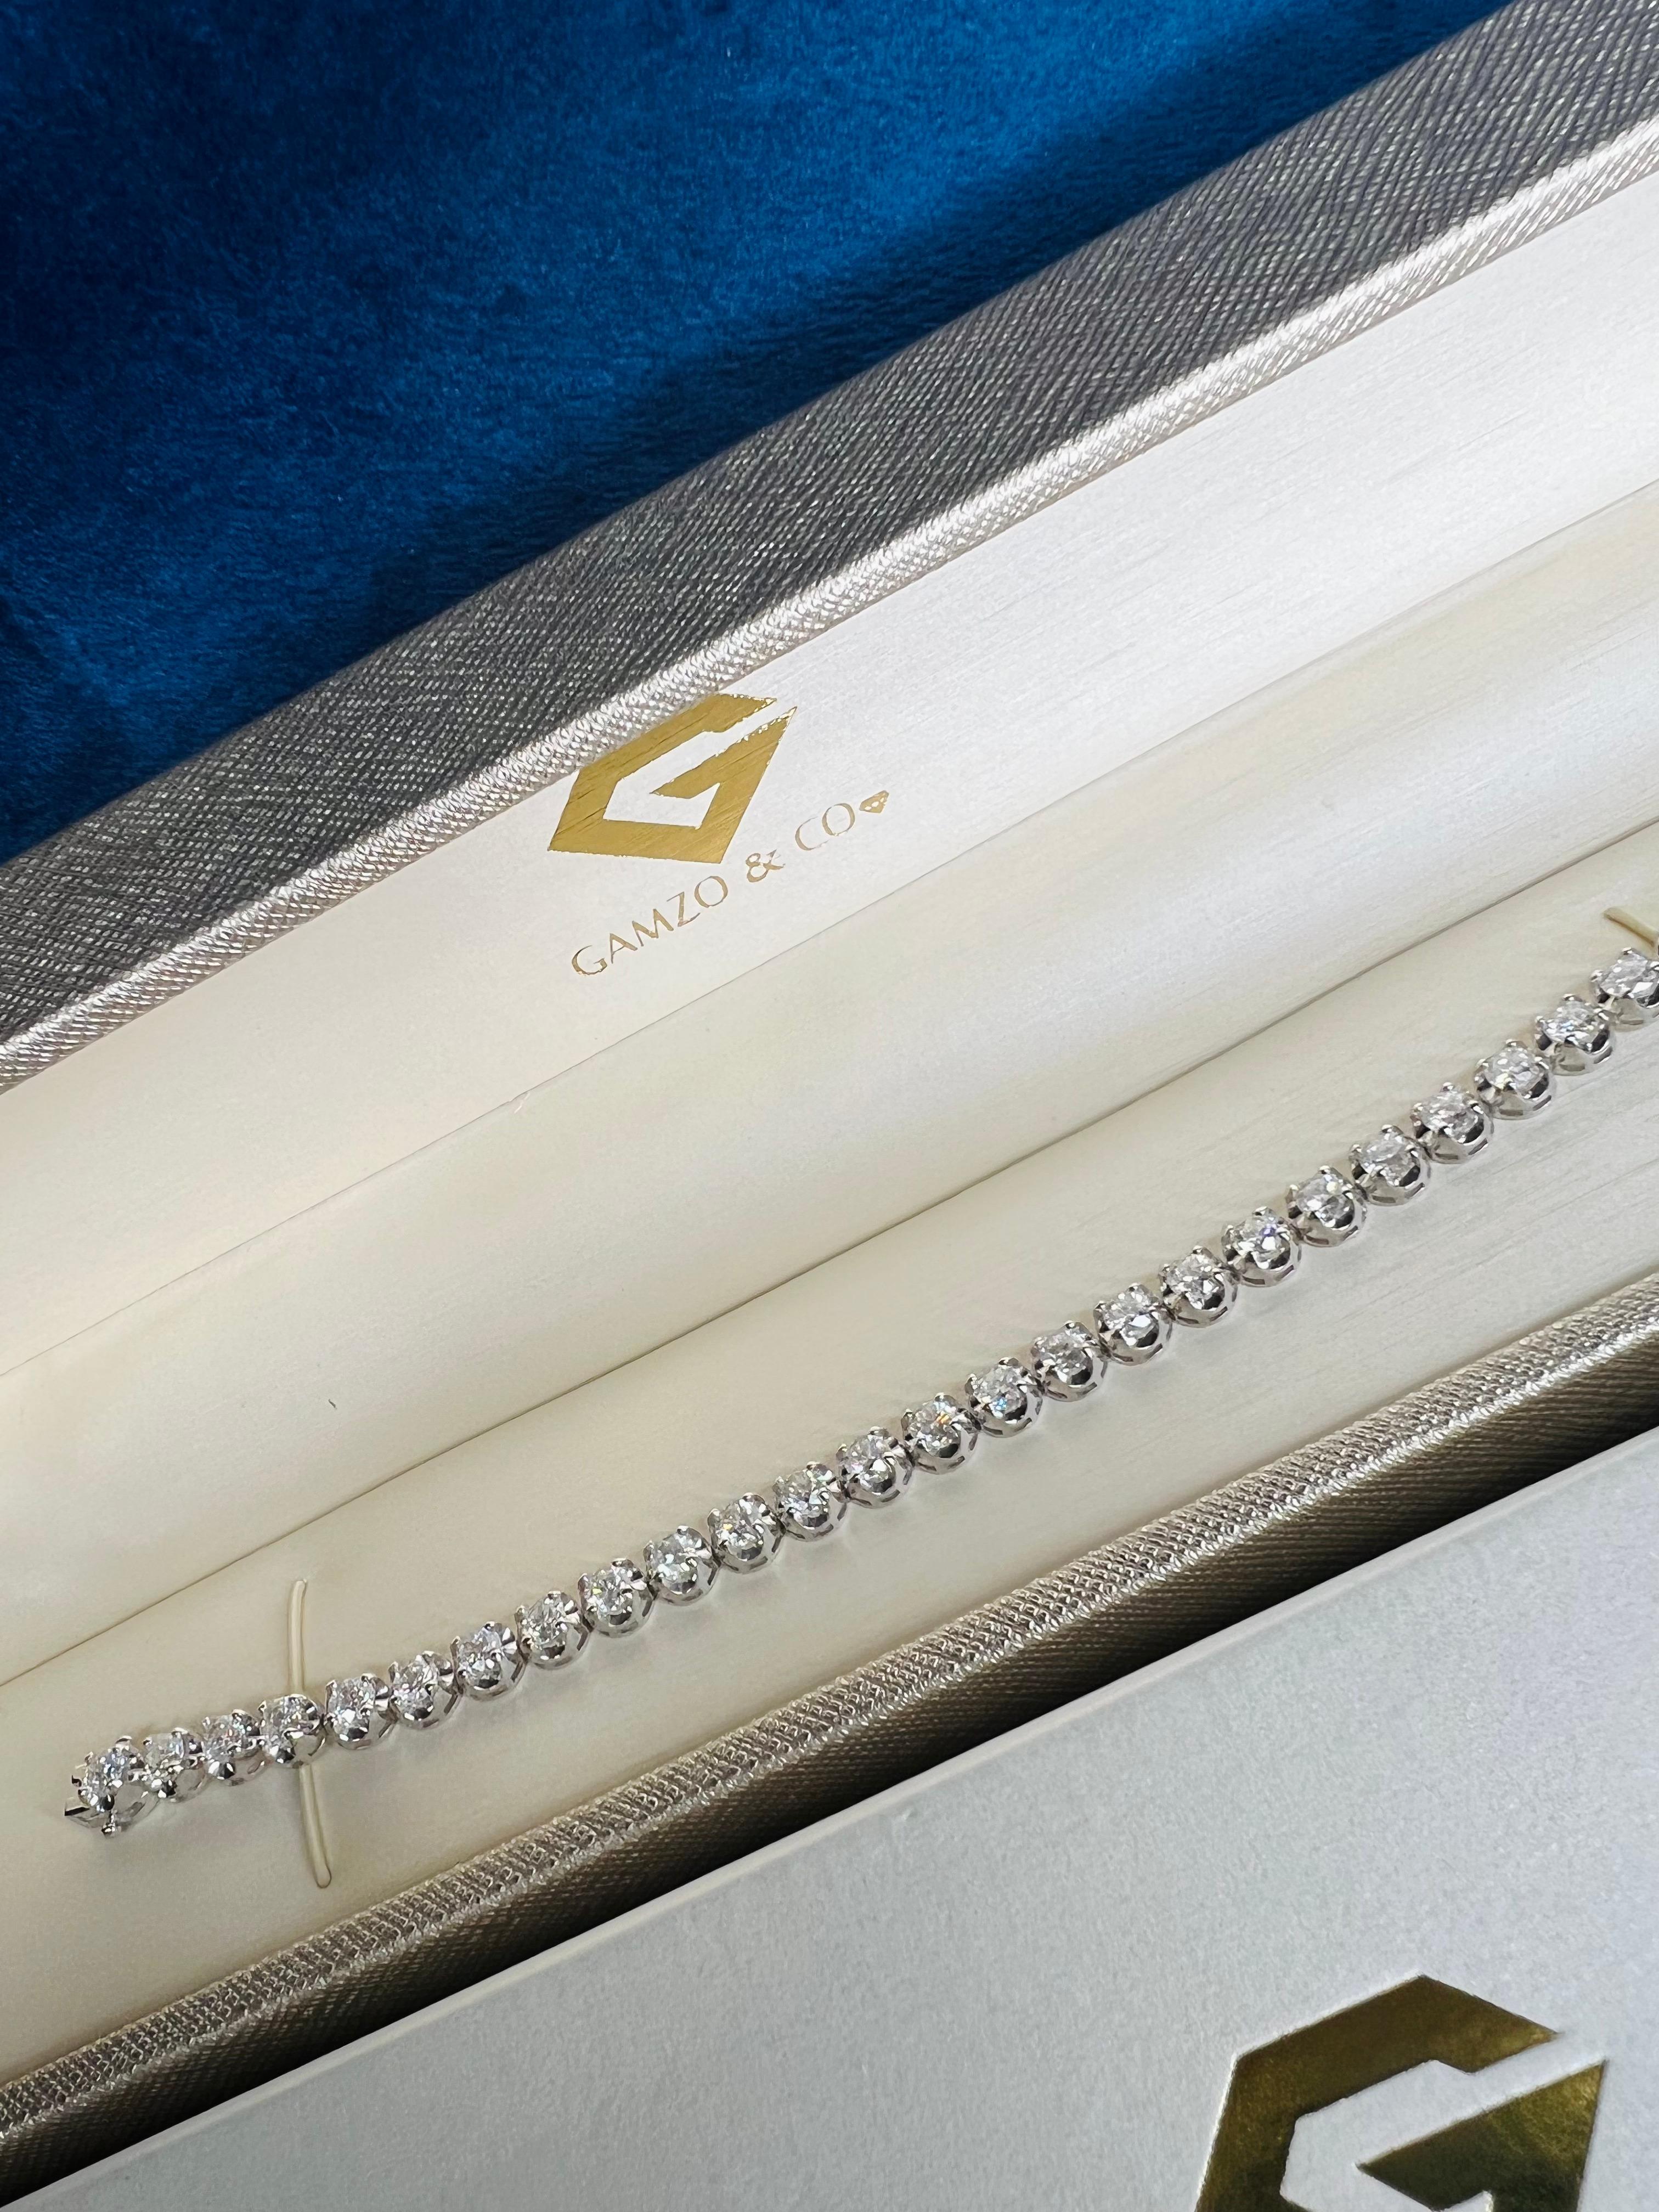 These beautiful round diamonds dance around your wrist as they absorb light and attention.
Metal: 14k Gold
Diamond Cut: Round
Diamond Total Carats: 7ct
Diamond Clarity: VS
Diamond Color: F
Color: White Gold
Bracelet Length: 5 Inches 
Included with